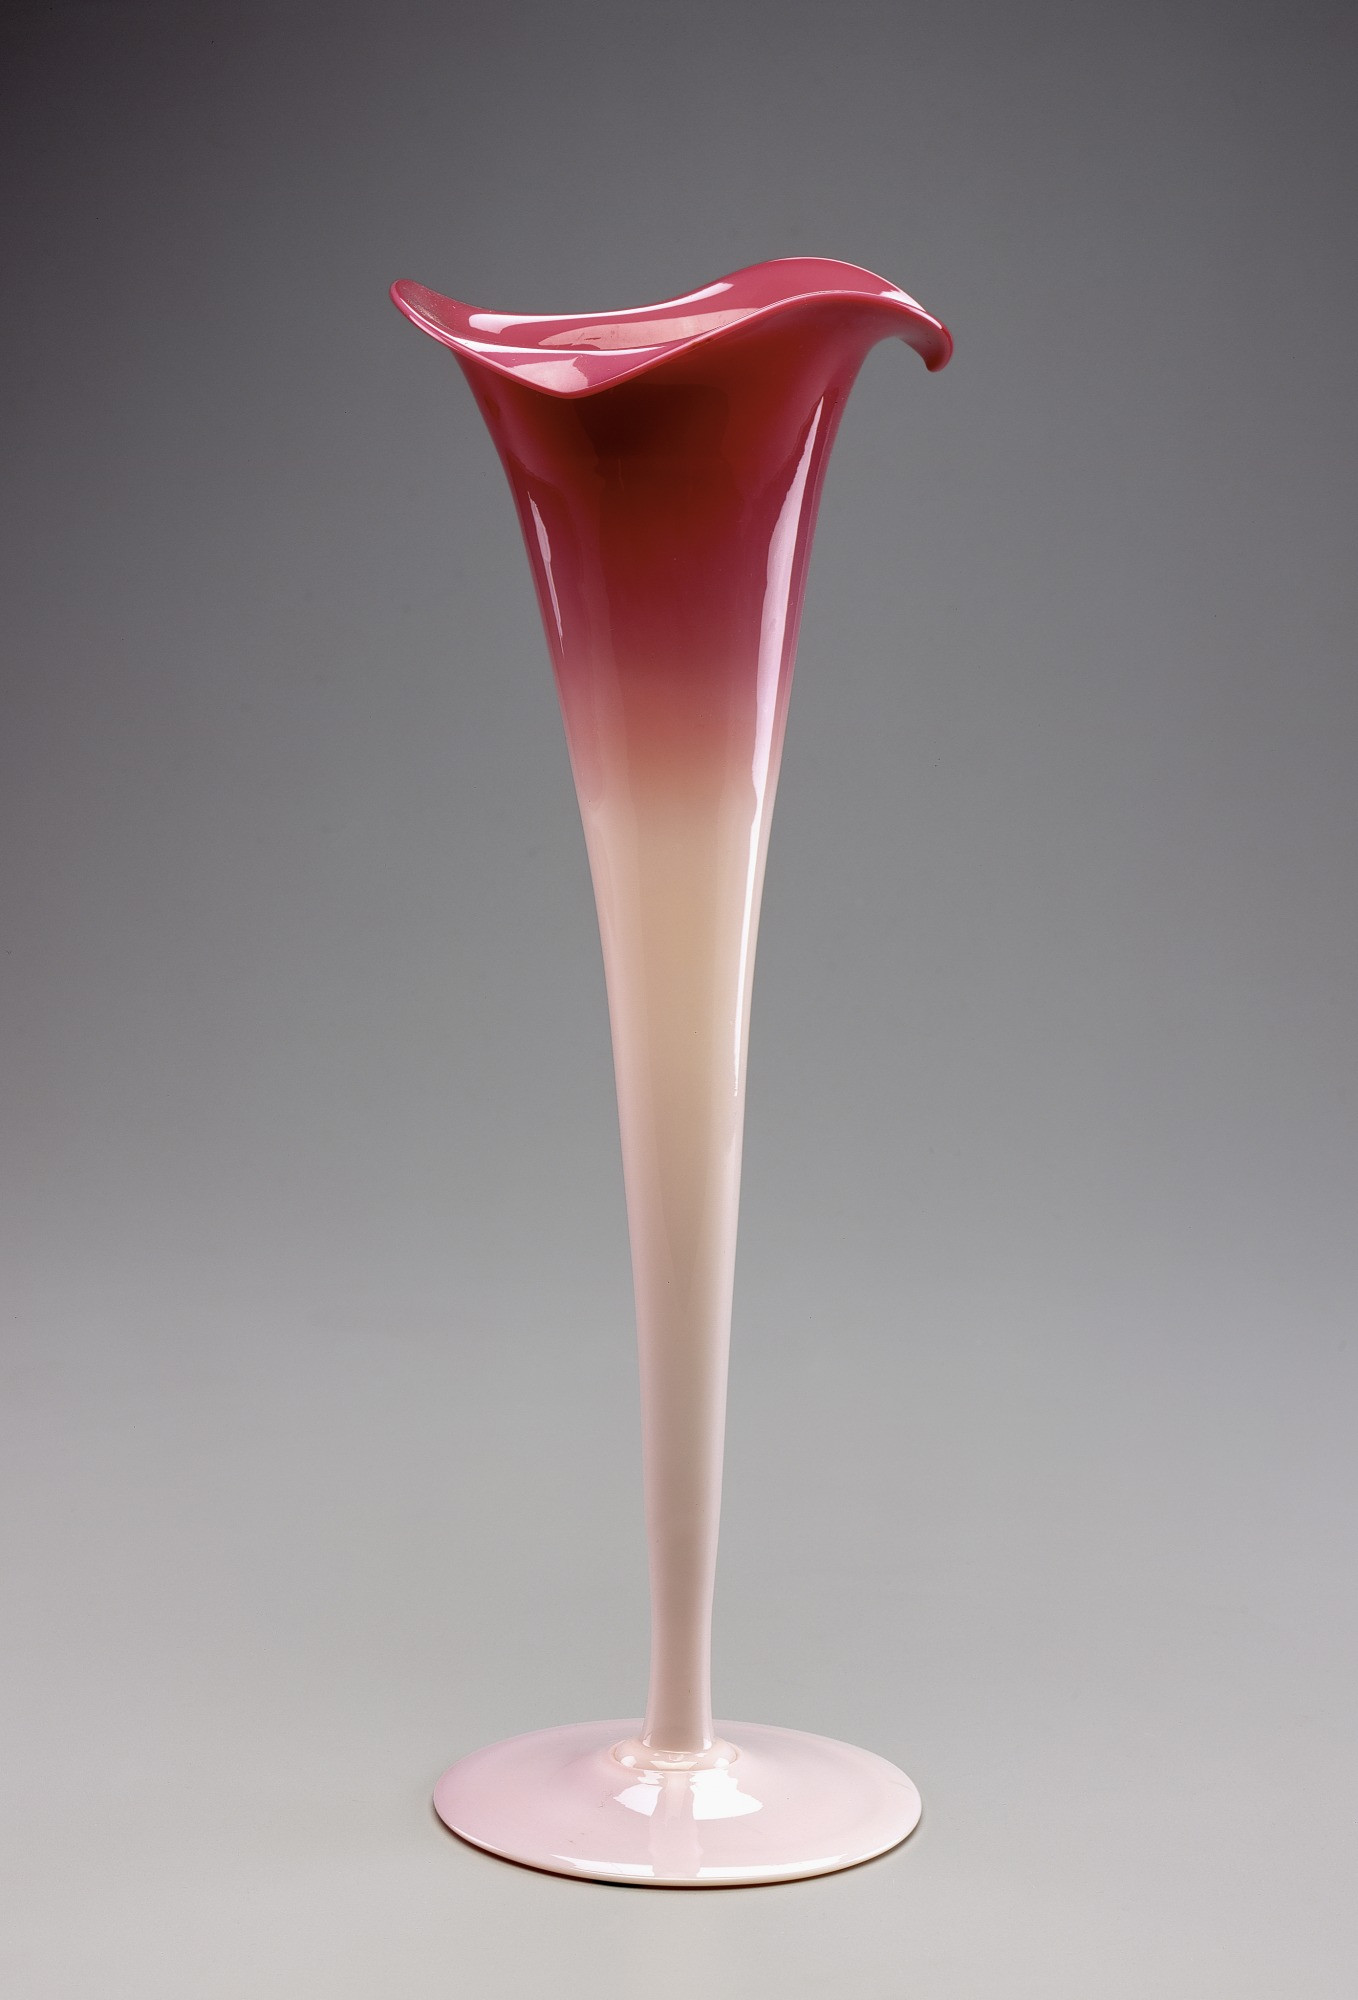 27 Stylish Susan Paley Vases 2024 free download susan paley vases of wild rose lily vase detroit institute of arts museum inside download the image